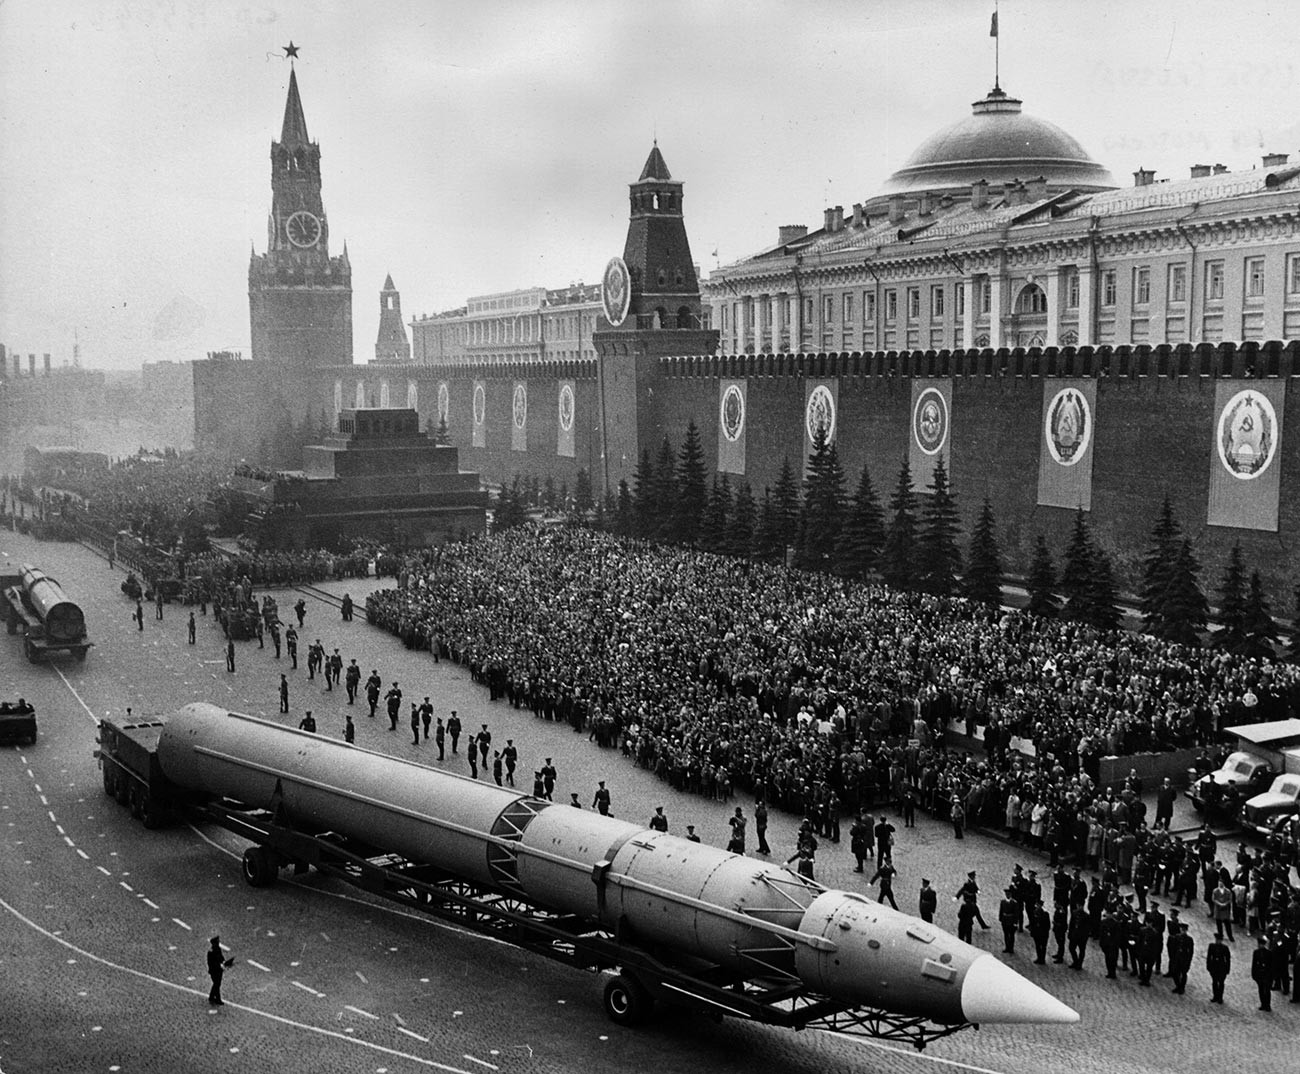 A Russian Intercontinental Missile crossing Red Square during the military parade in Moscow marking the 20th Anniversary of the end of the war in Europe.